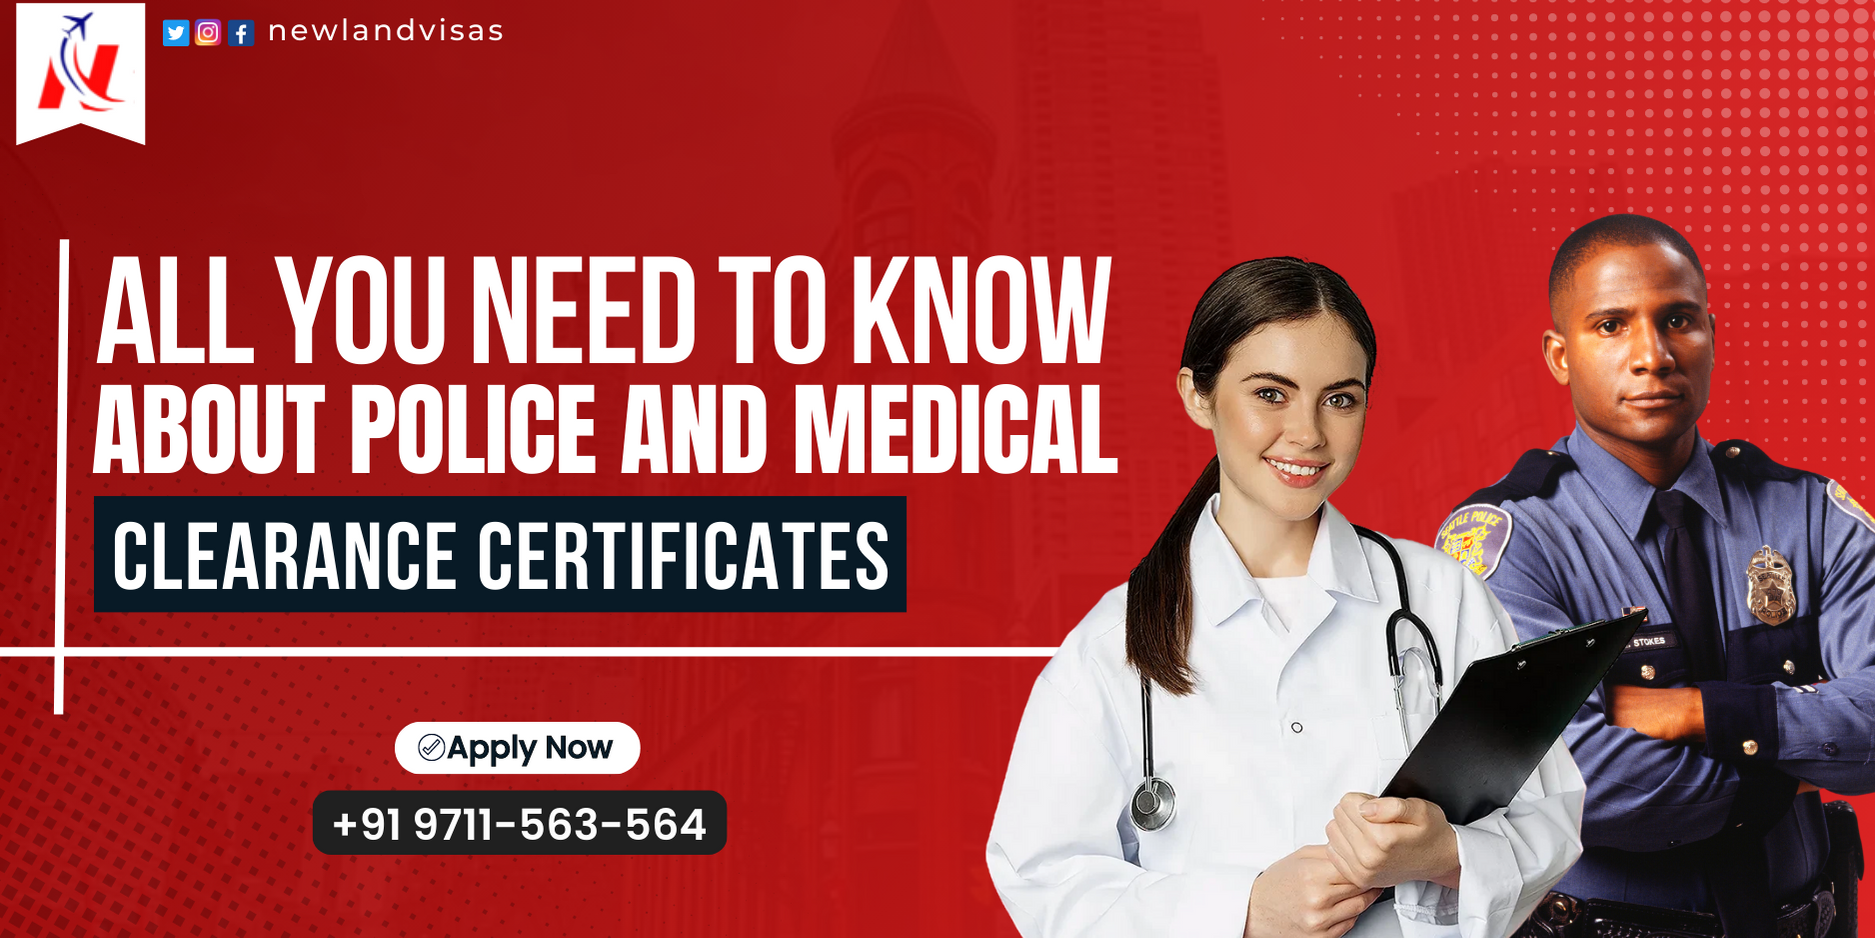 All you need to know about Police and Medical Clearance Certificates